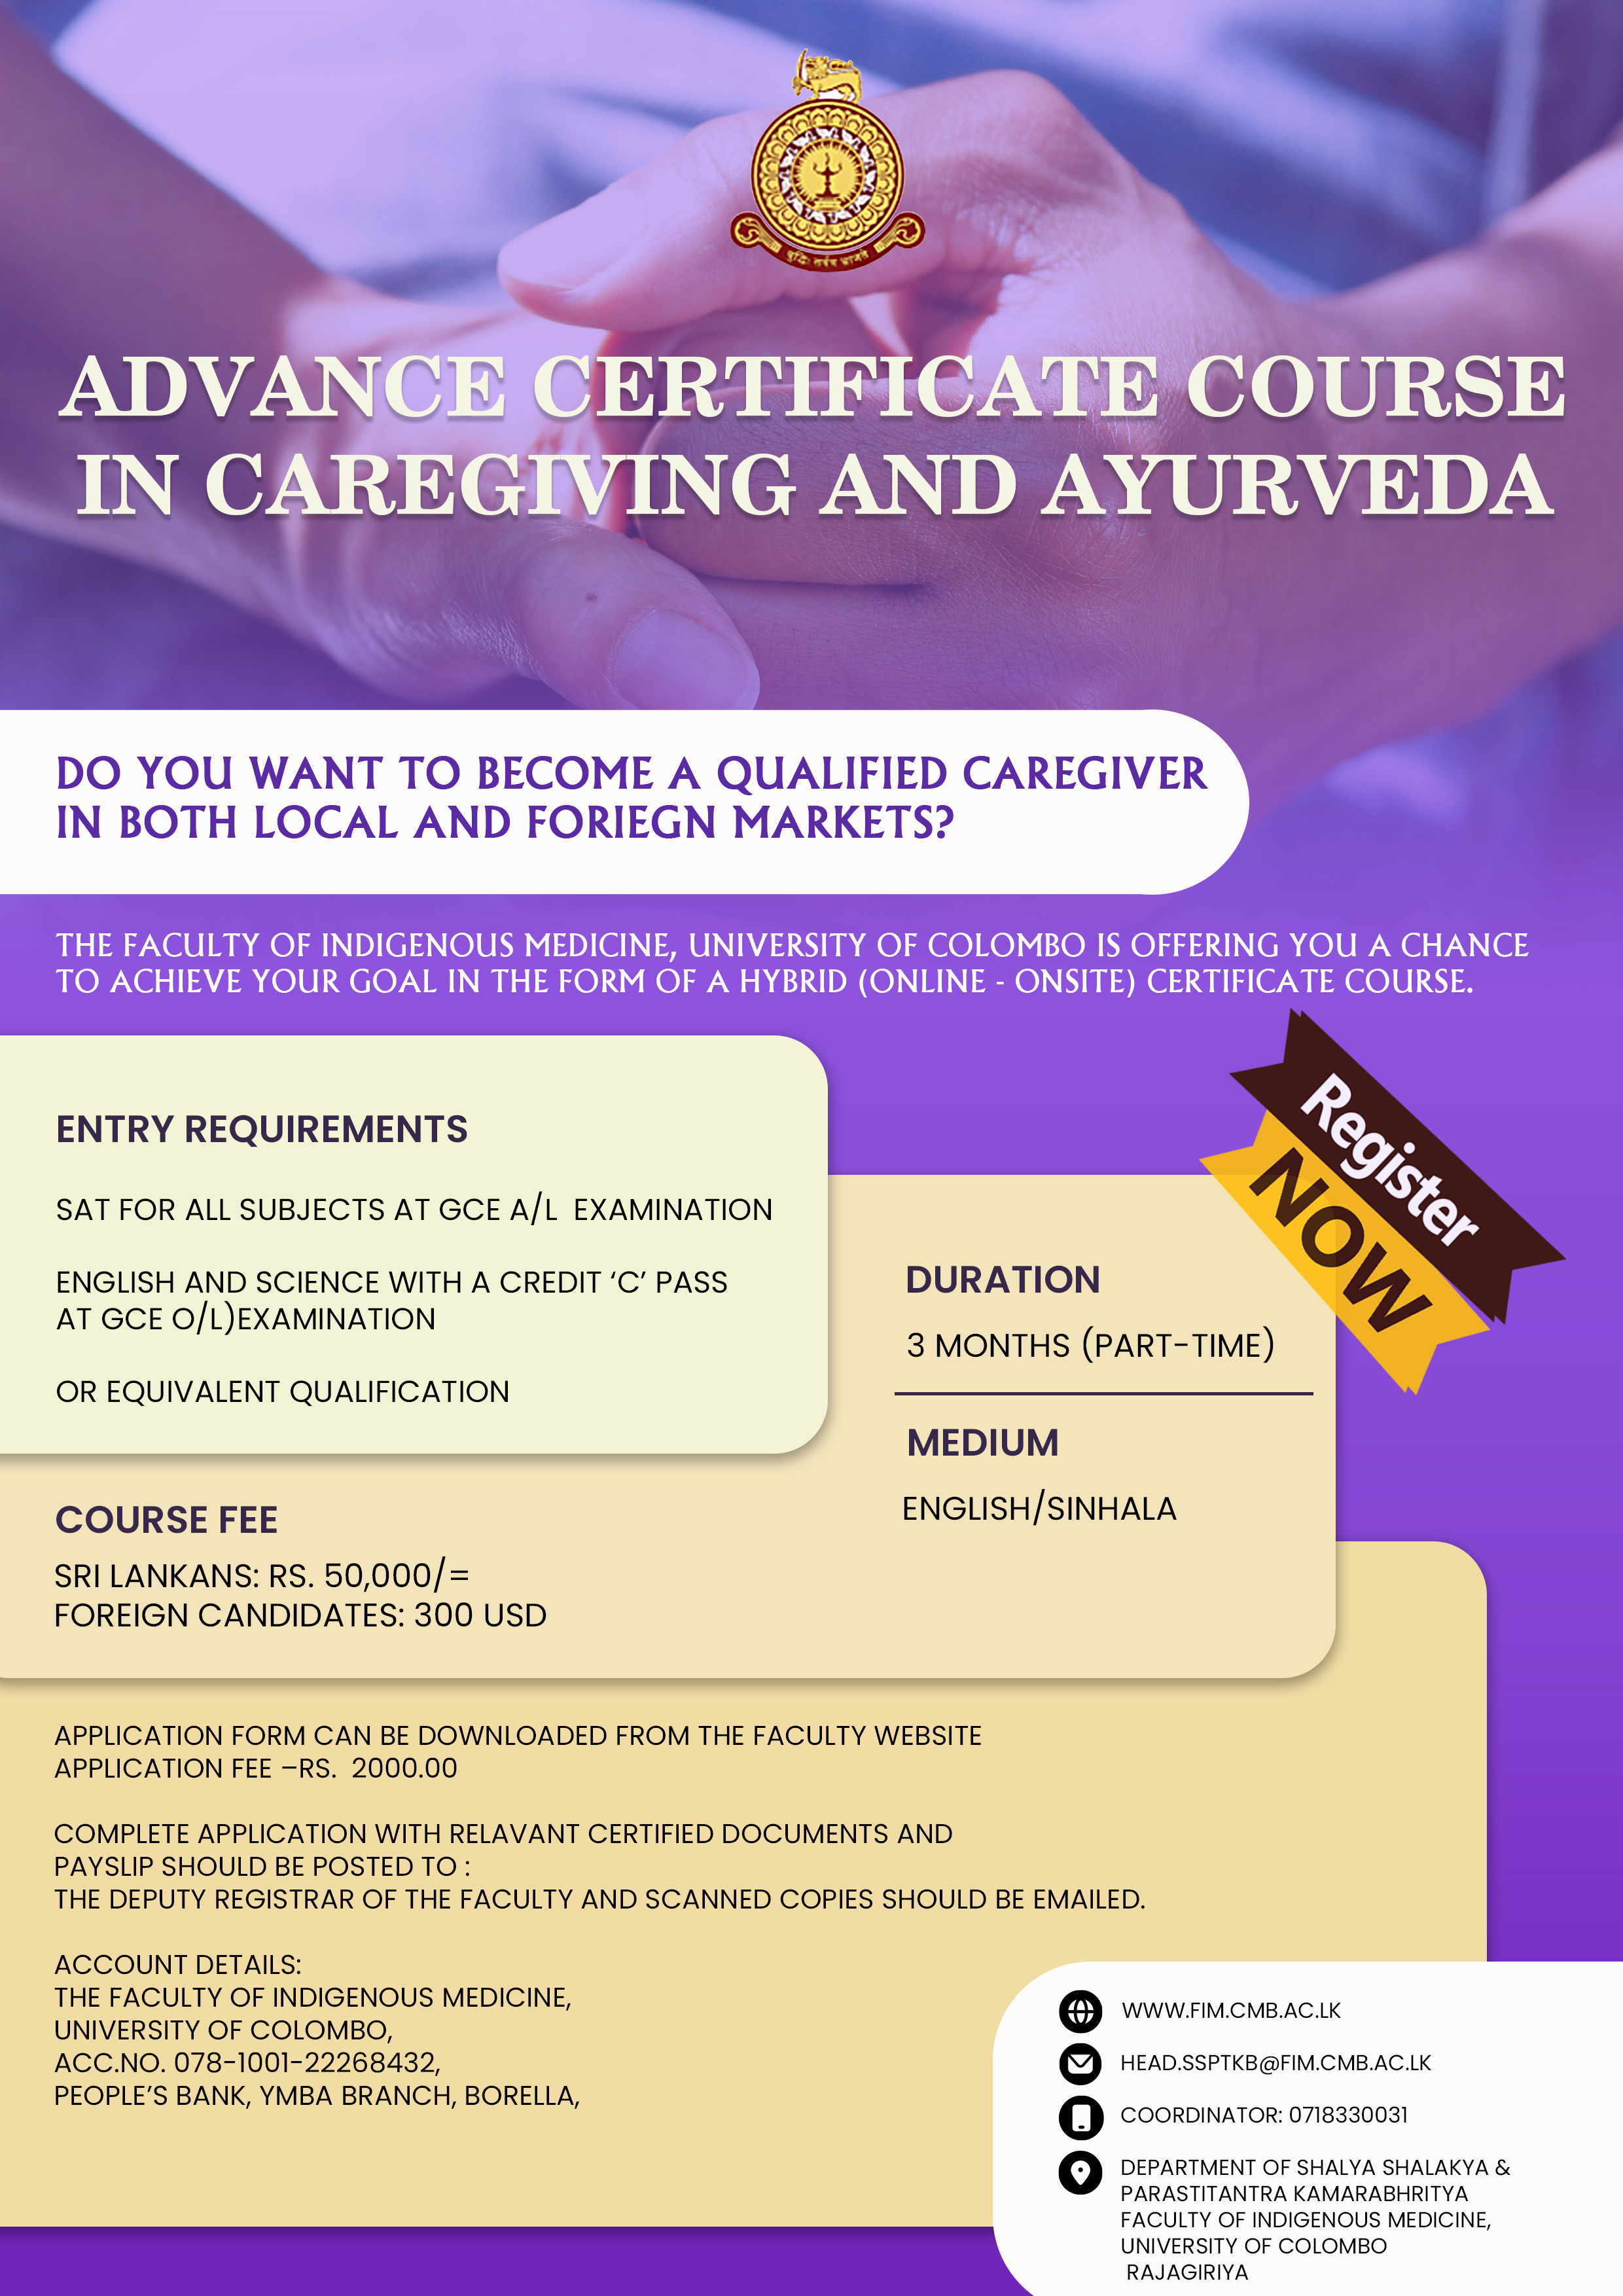 Advance Certificate Course in Care giving and Ayurveda